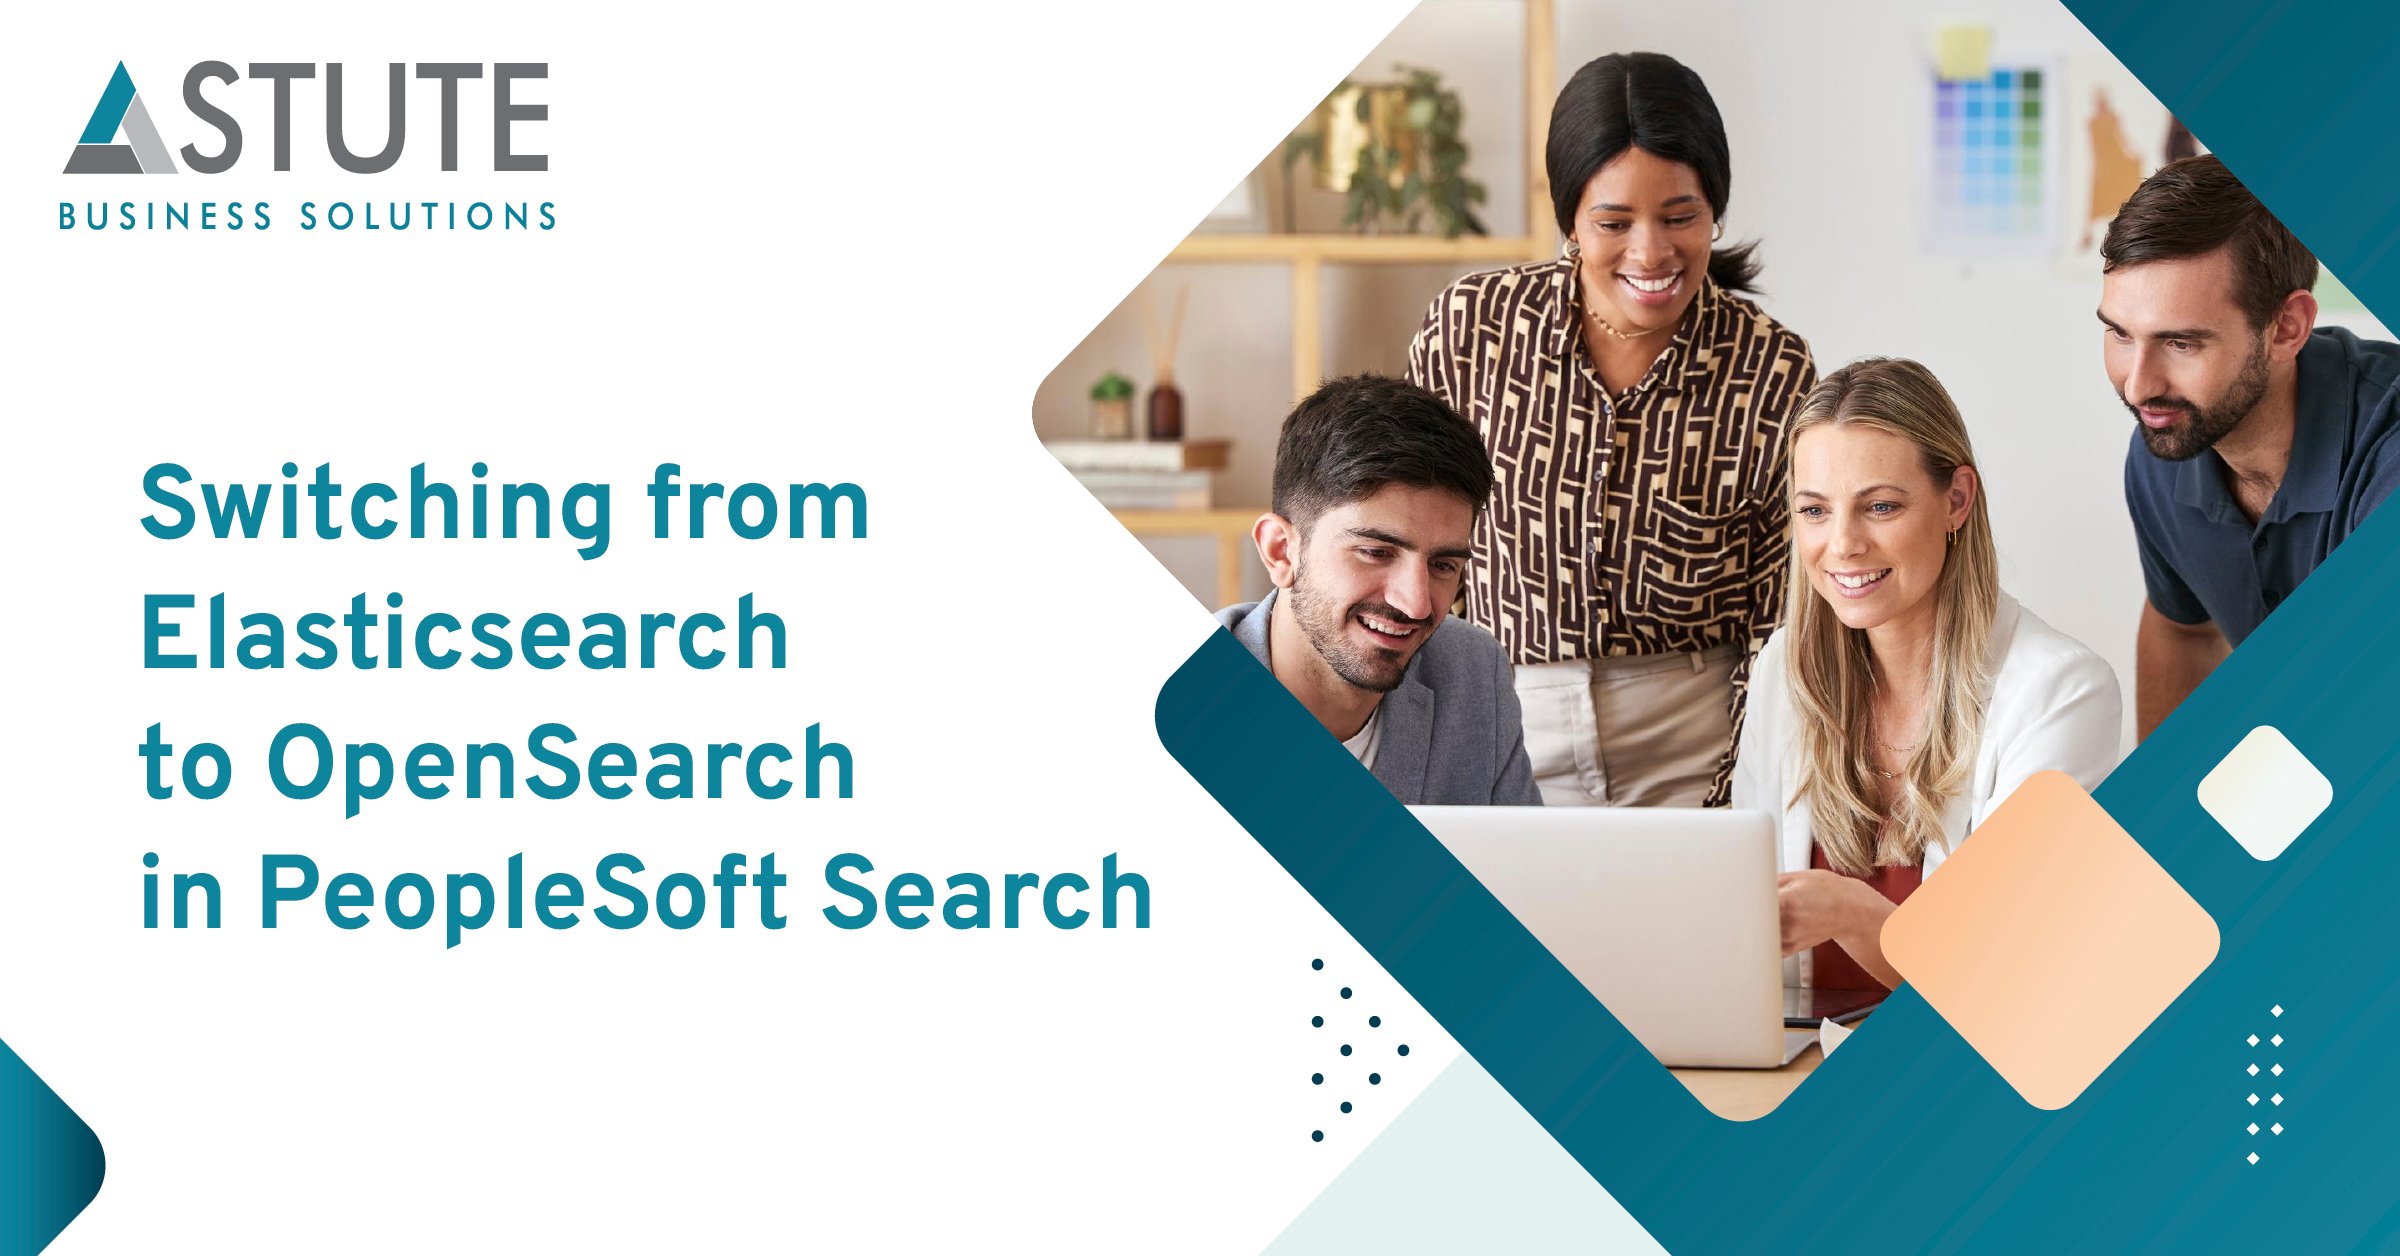 Switching from Elasticsearch to OpenSearch in PeopleSoft